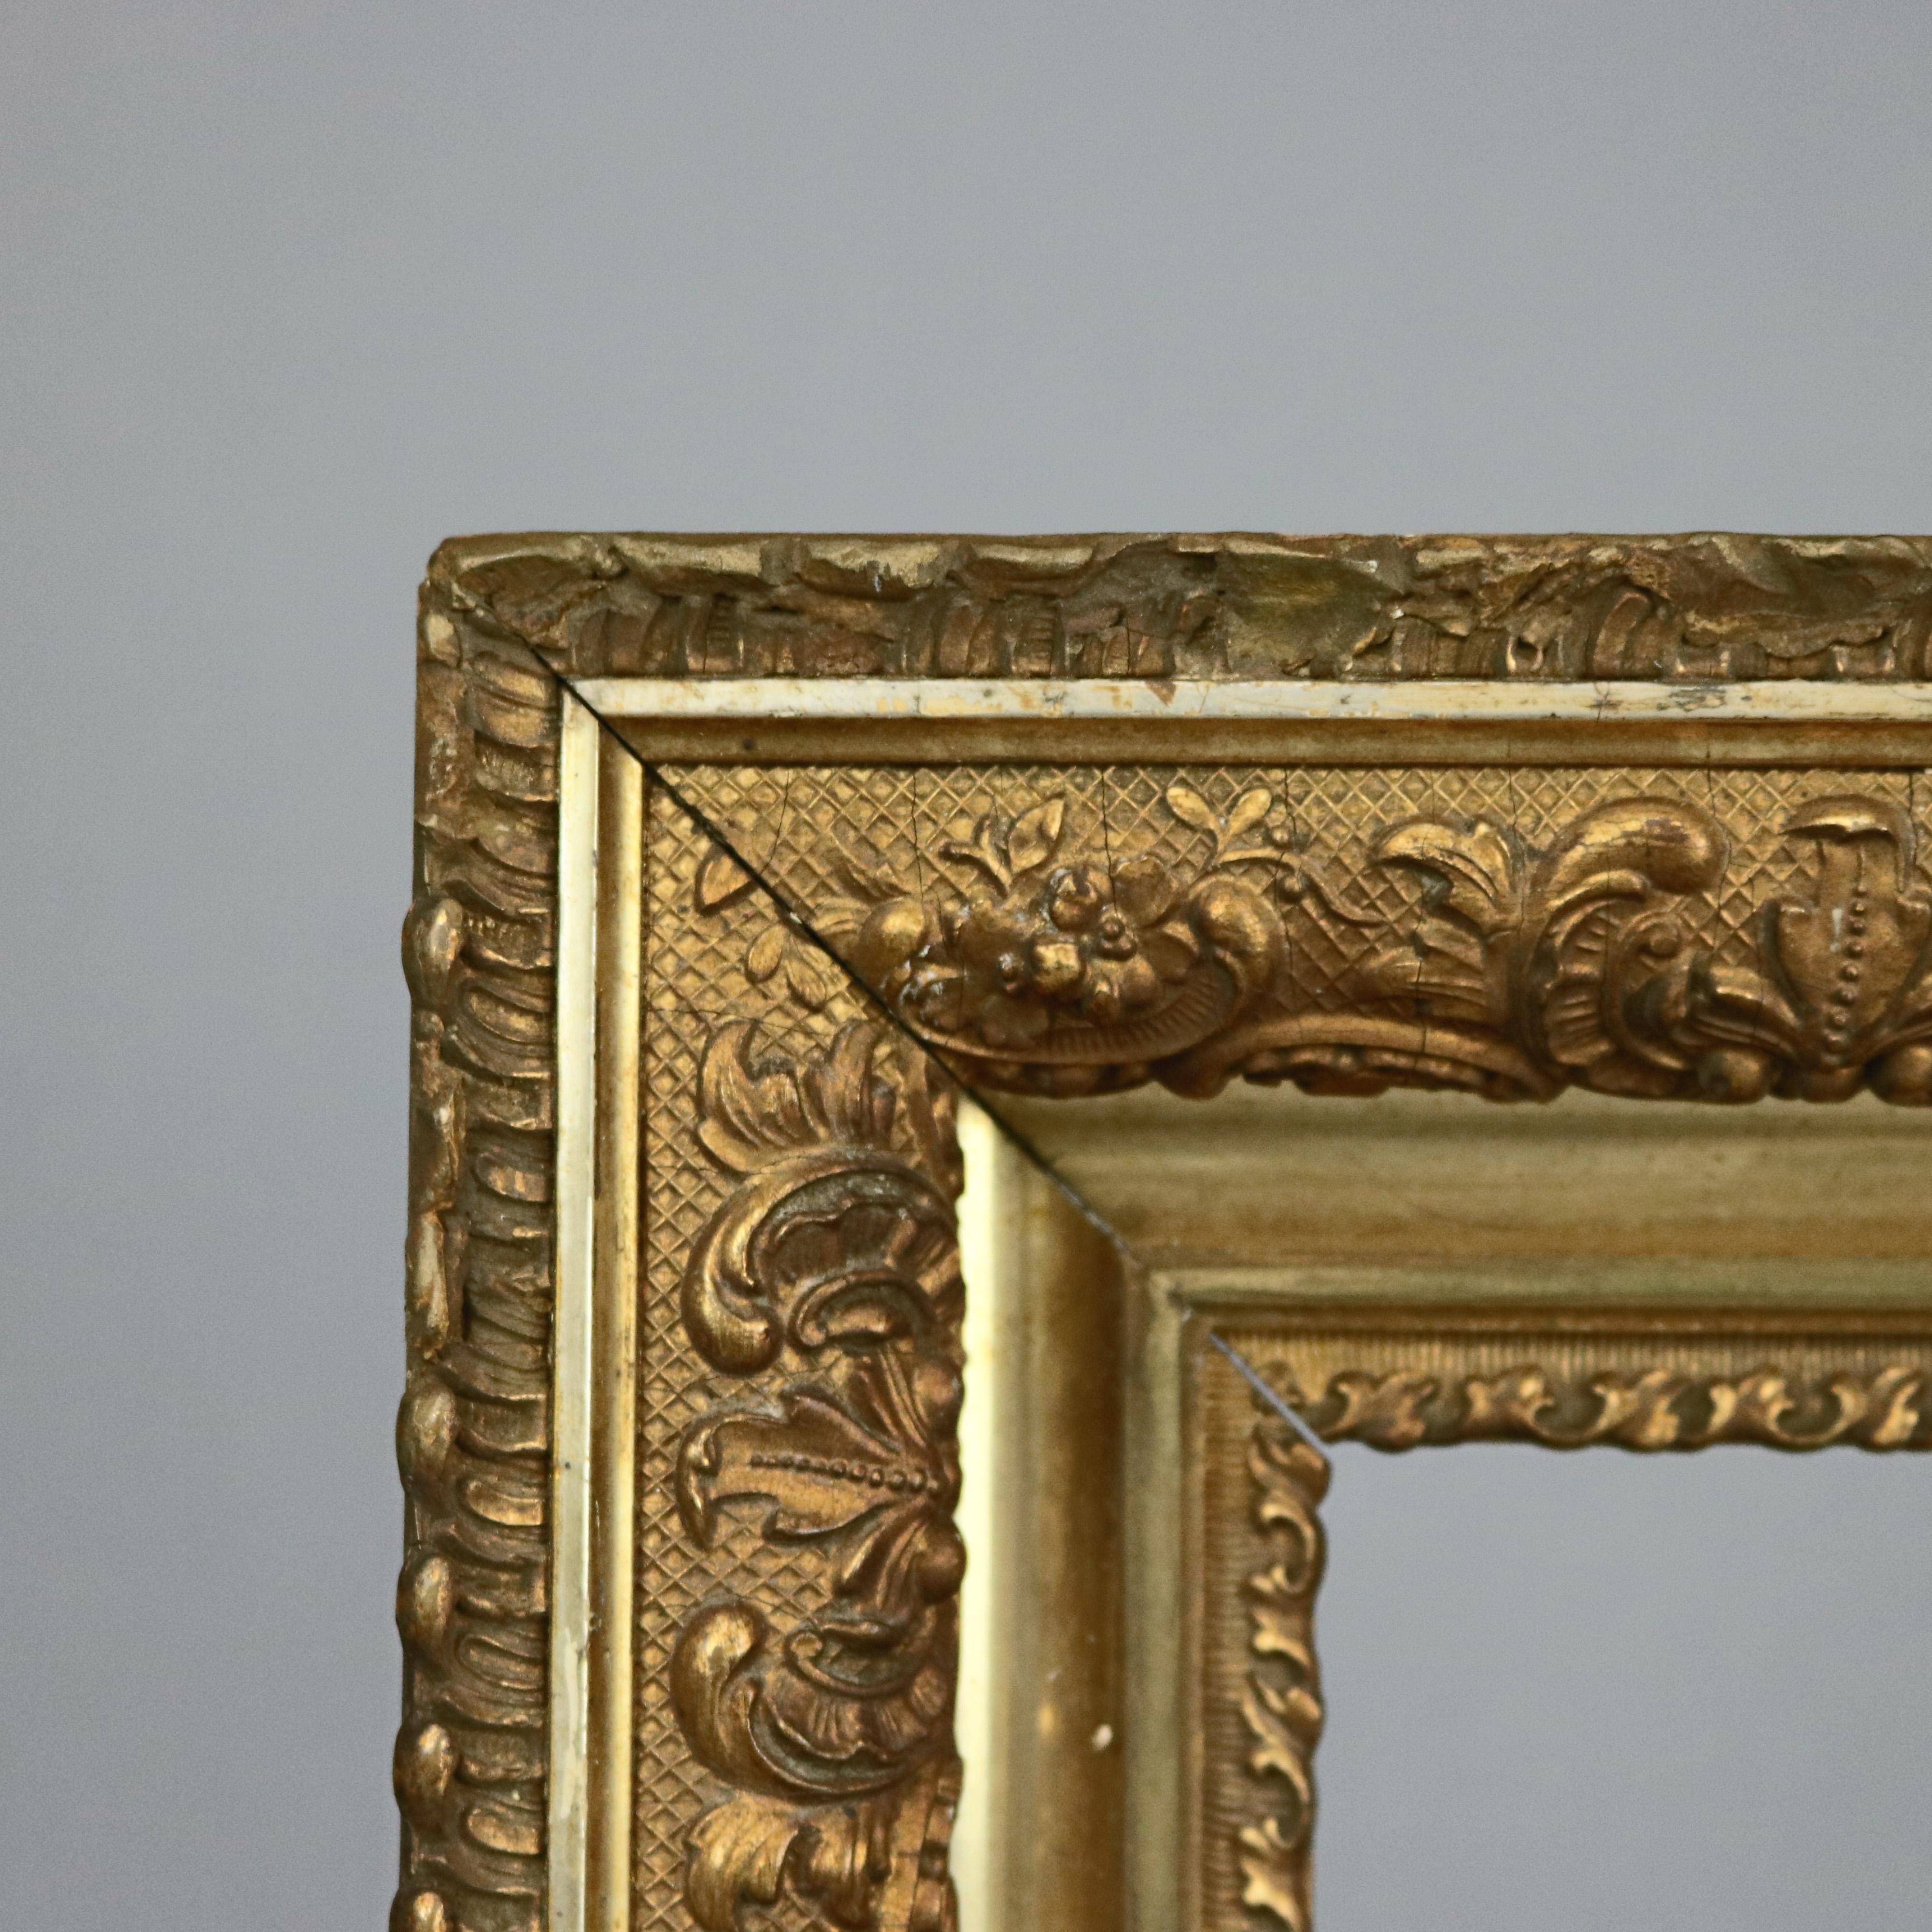 An antique Victorian art frame offers giltwood construction in first finish and with foliate, scroll and gadroon elements, c1890.

Measures: 17.75